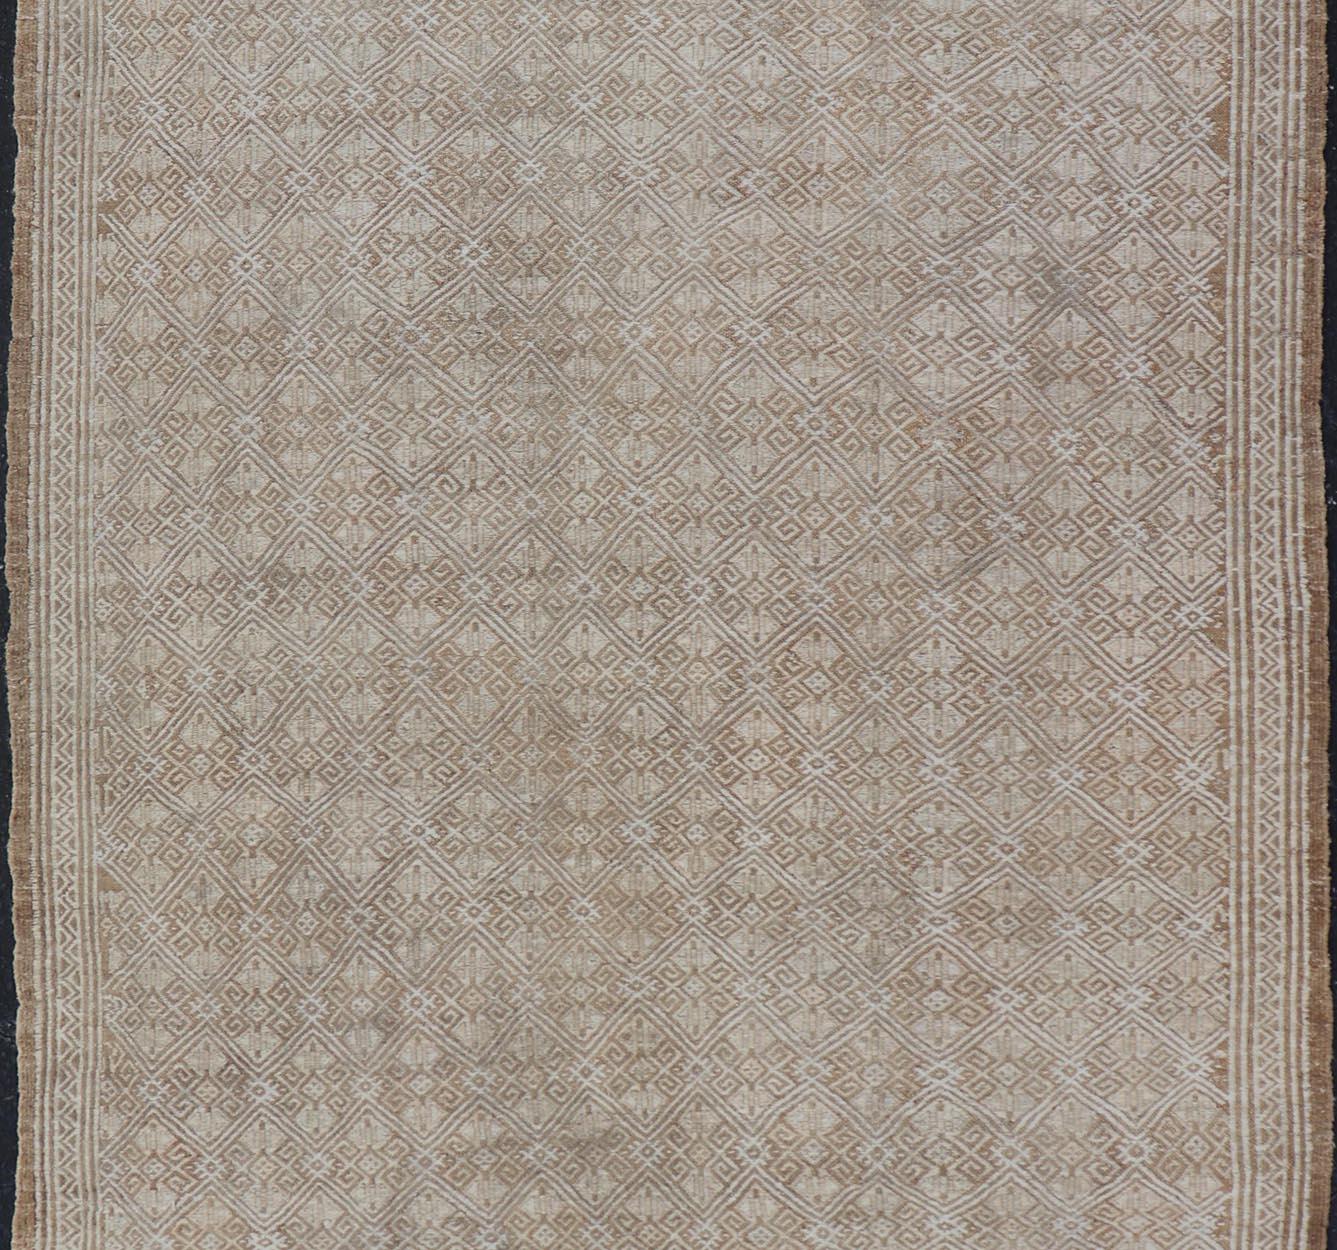 Wool All-Over Design Turkish Vintage Kilim Rug in Tan, Taupe and Earth Tones For Sale